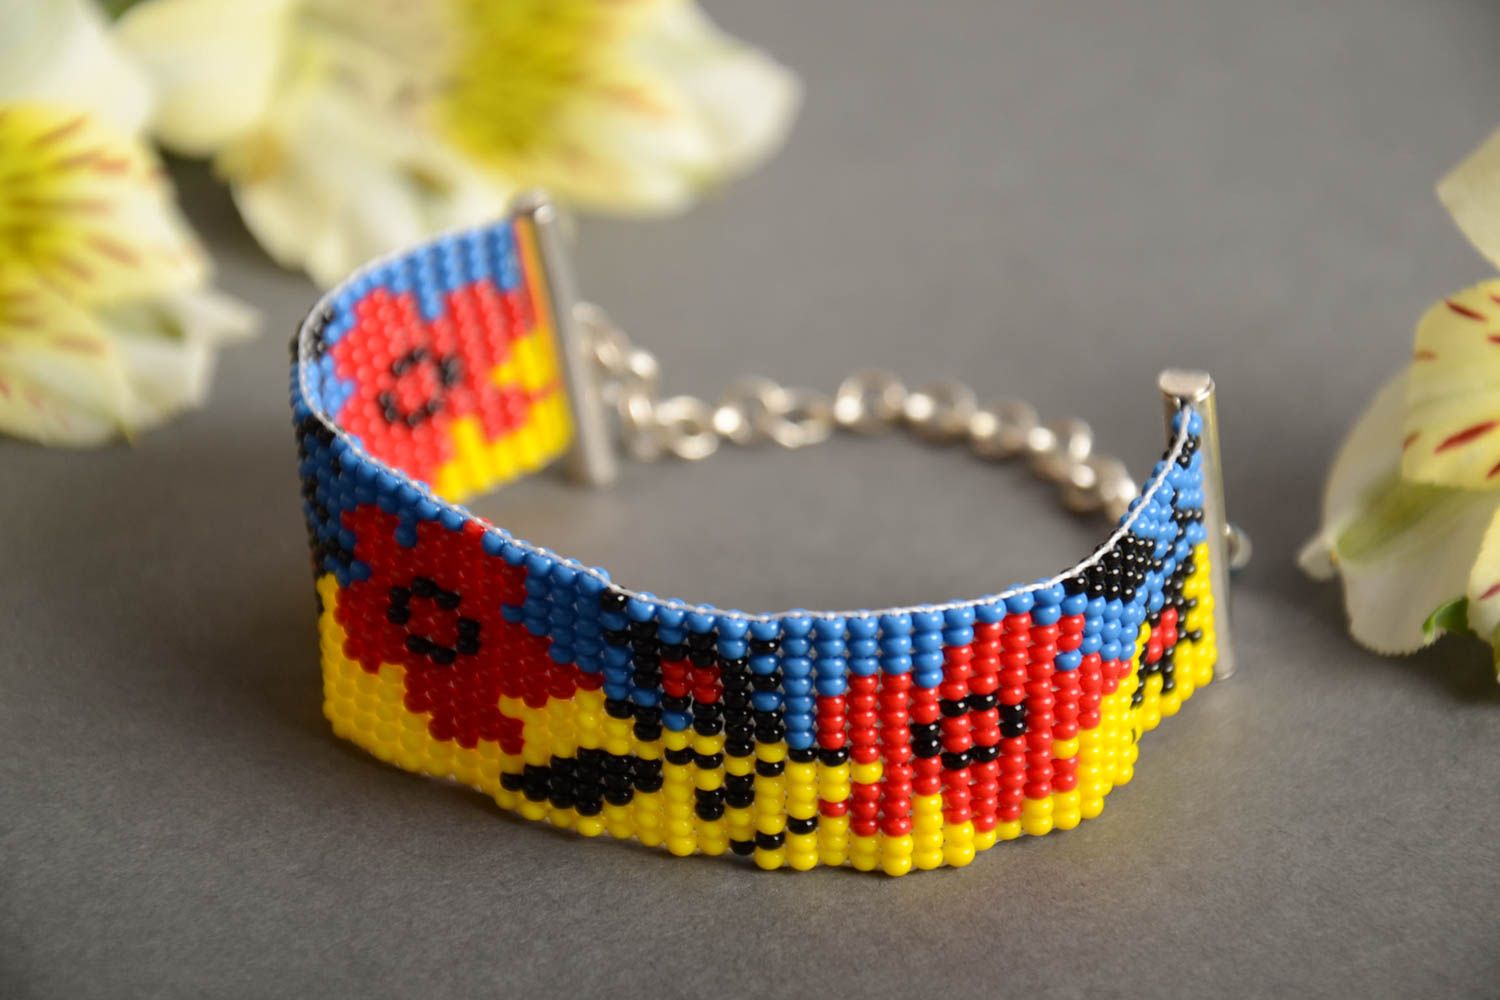 Handmade blue and yellow bead woven wrist bracelet with red poppy pattern